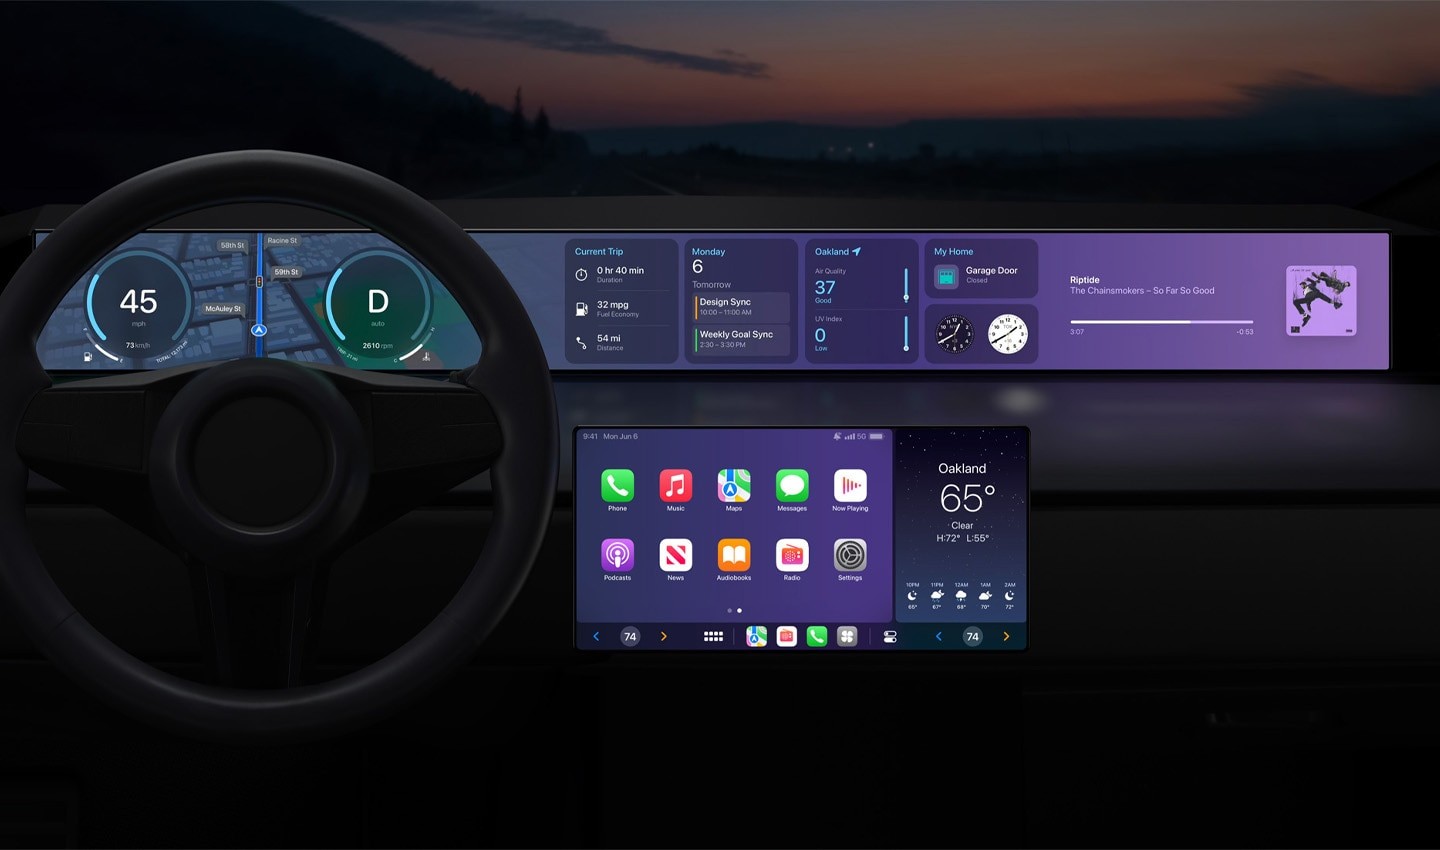 Apple’s designs for its fully integrated CarPlay look beautiful. Even if there is a lot of information at the driver’s fingertips.